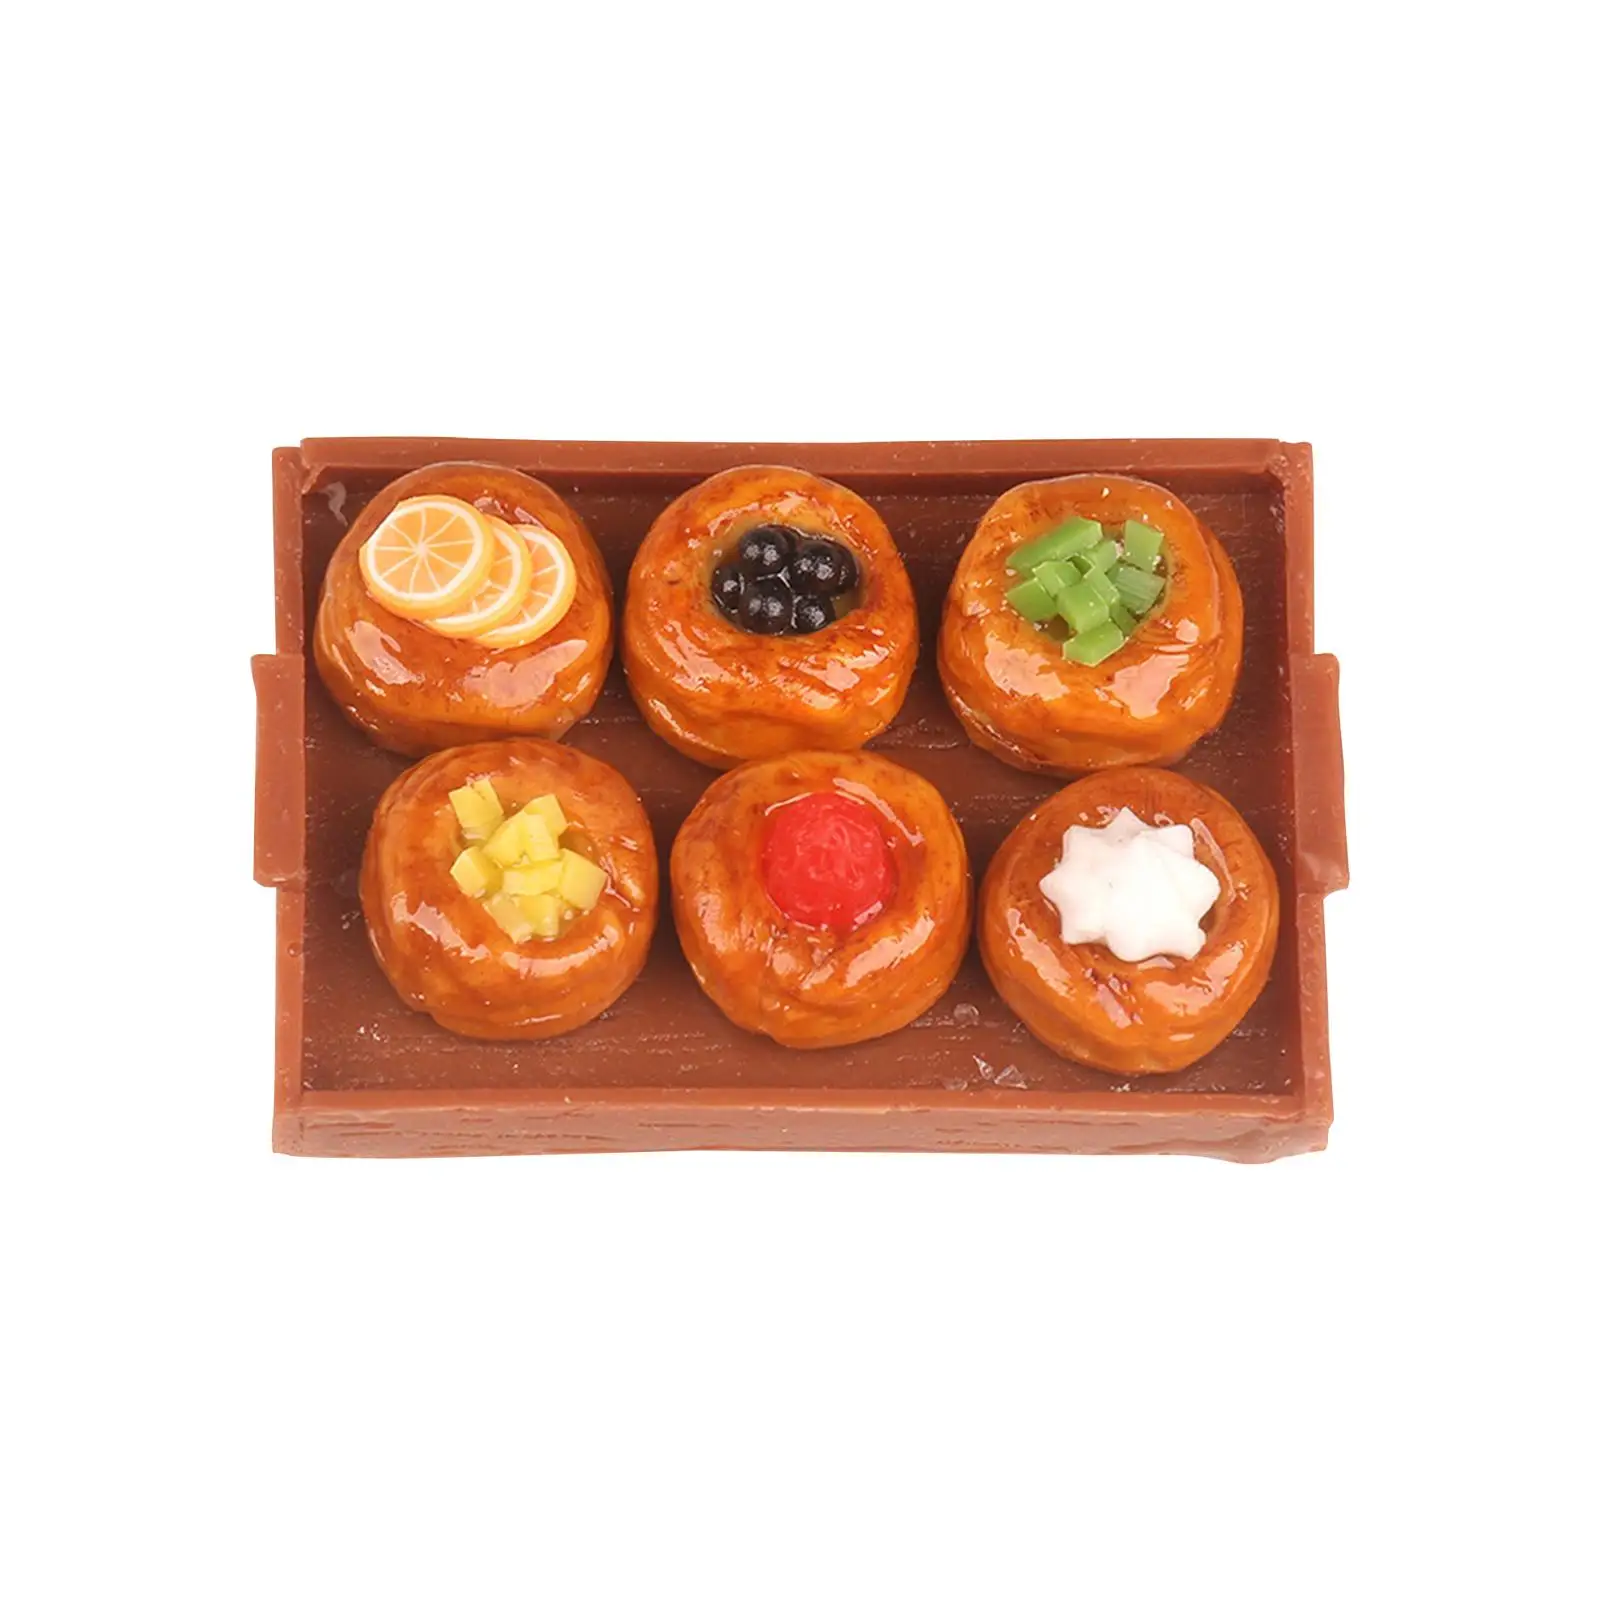 Dollhouse Bread with Tray Miniature Foods 1:12 Kitchen Accessory